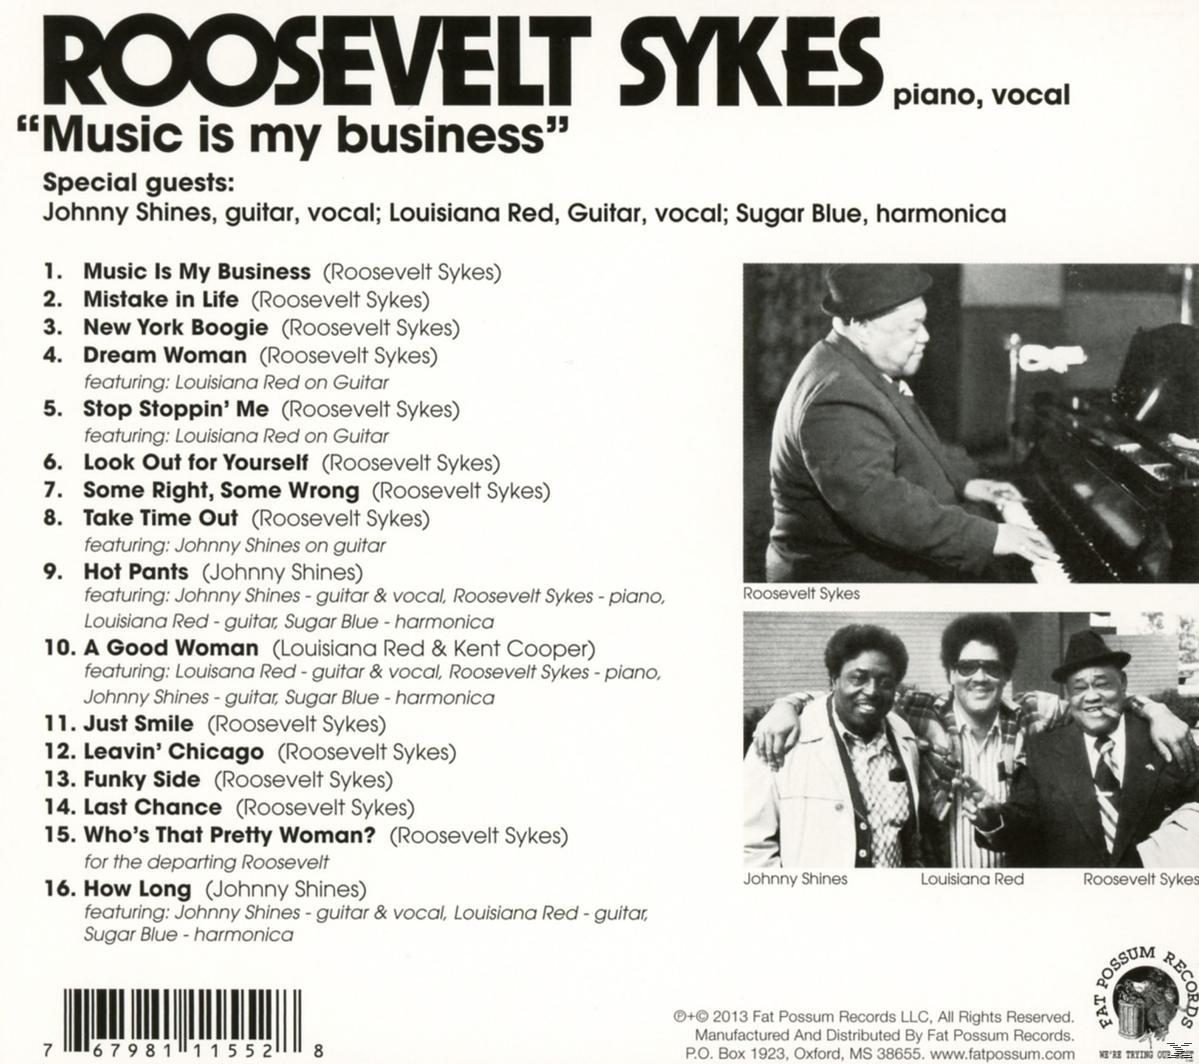 (CD) Sykes Roosevelt Is Business My - - Music